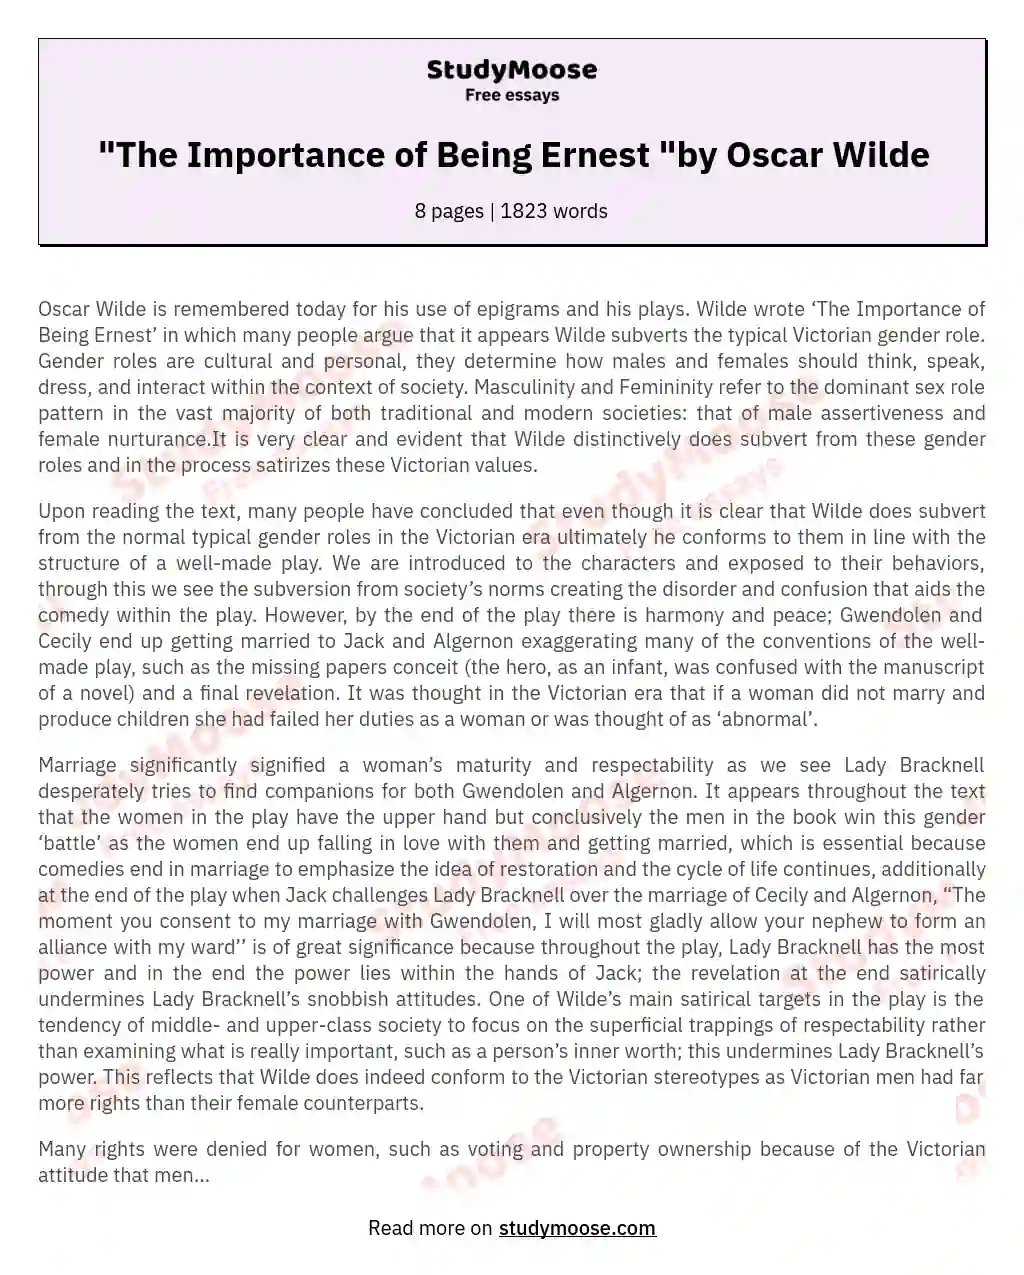 "The Importance of Being Ernest "by Oscar Wilde essay